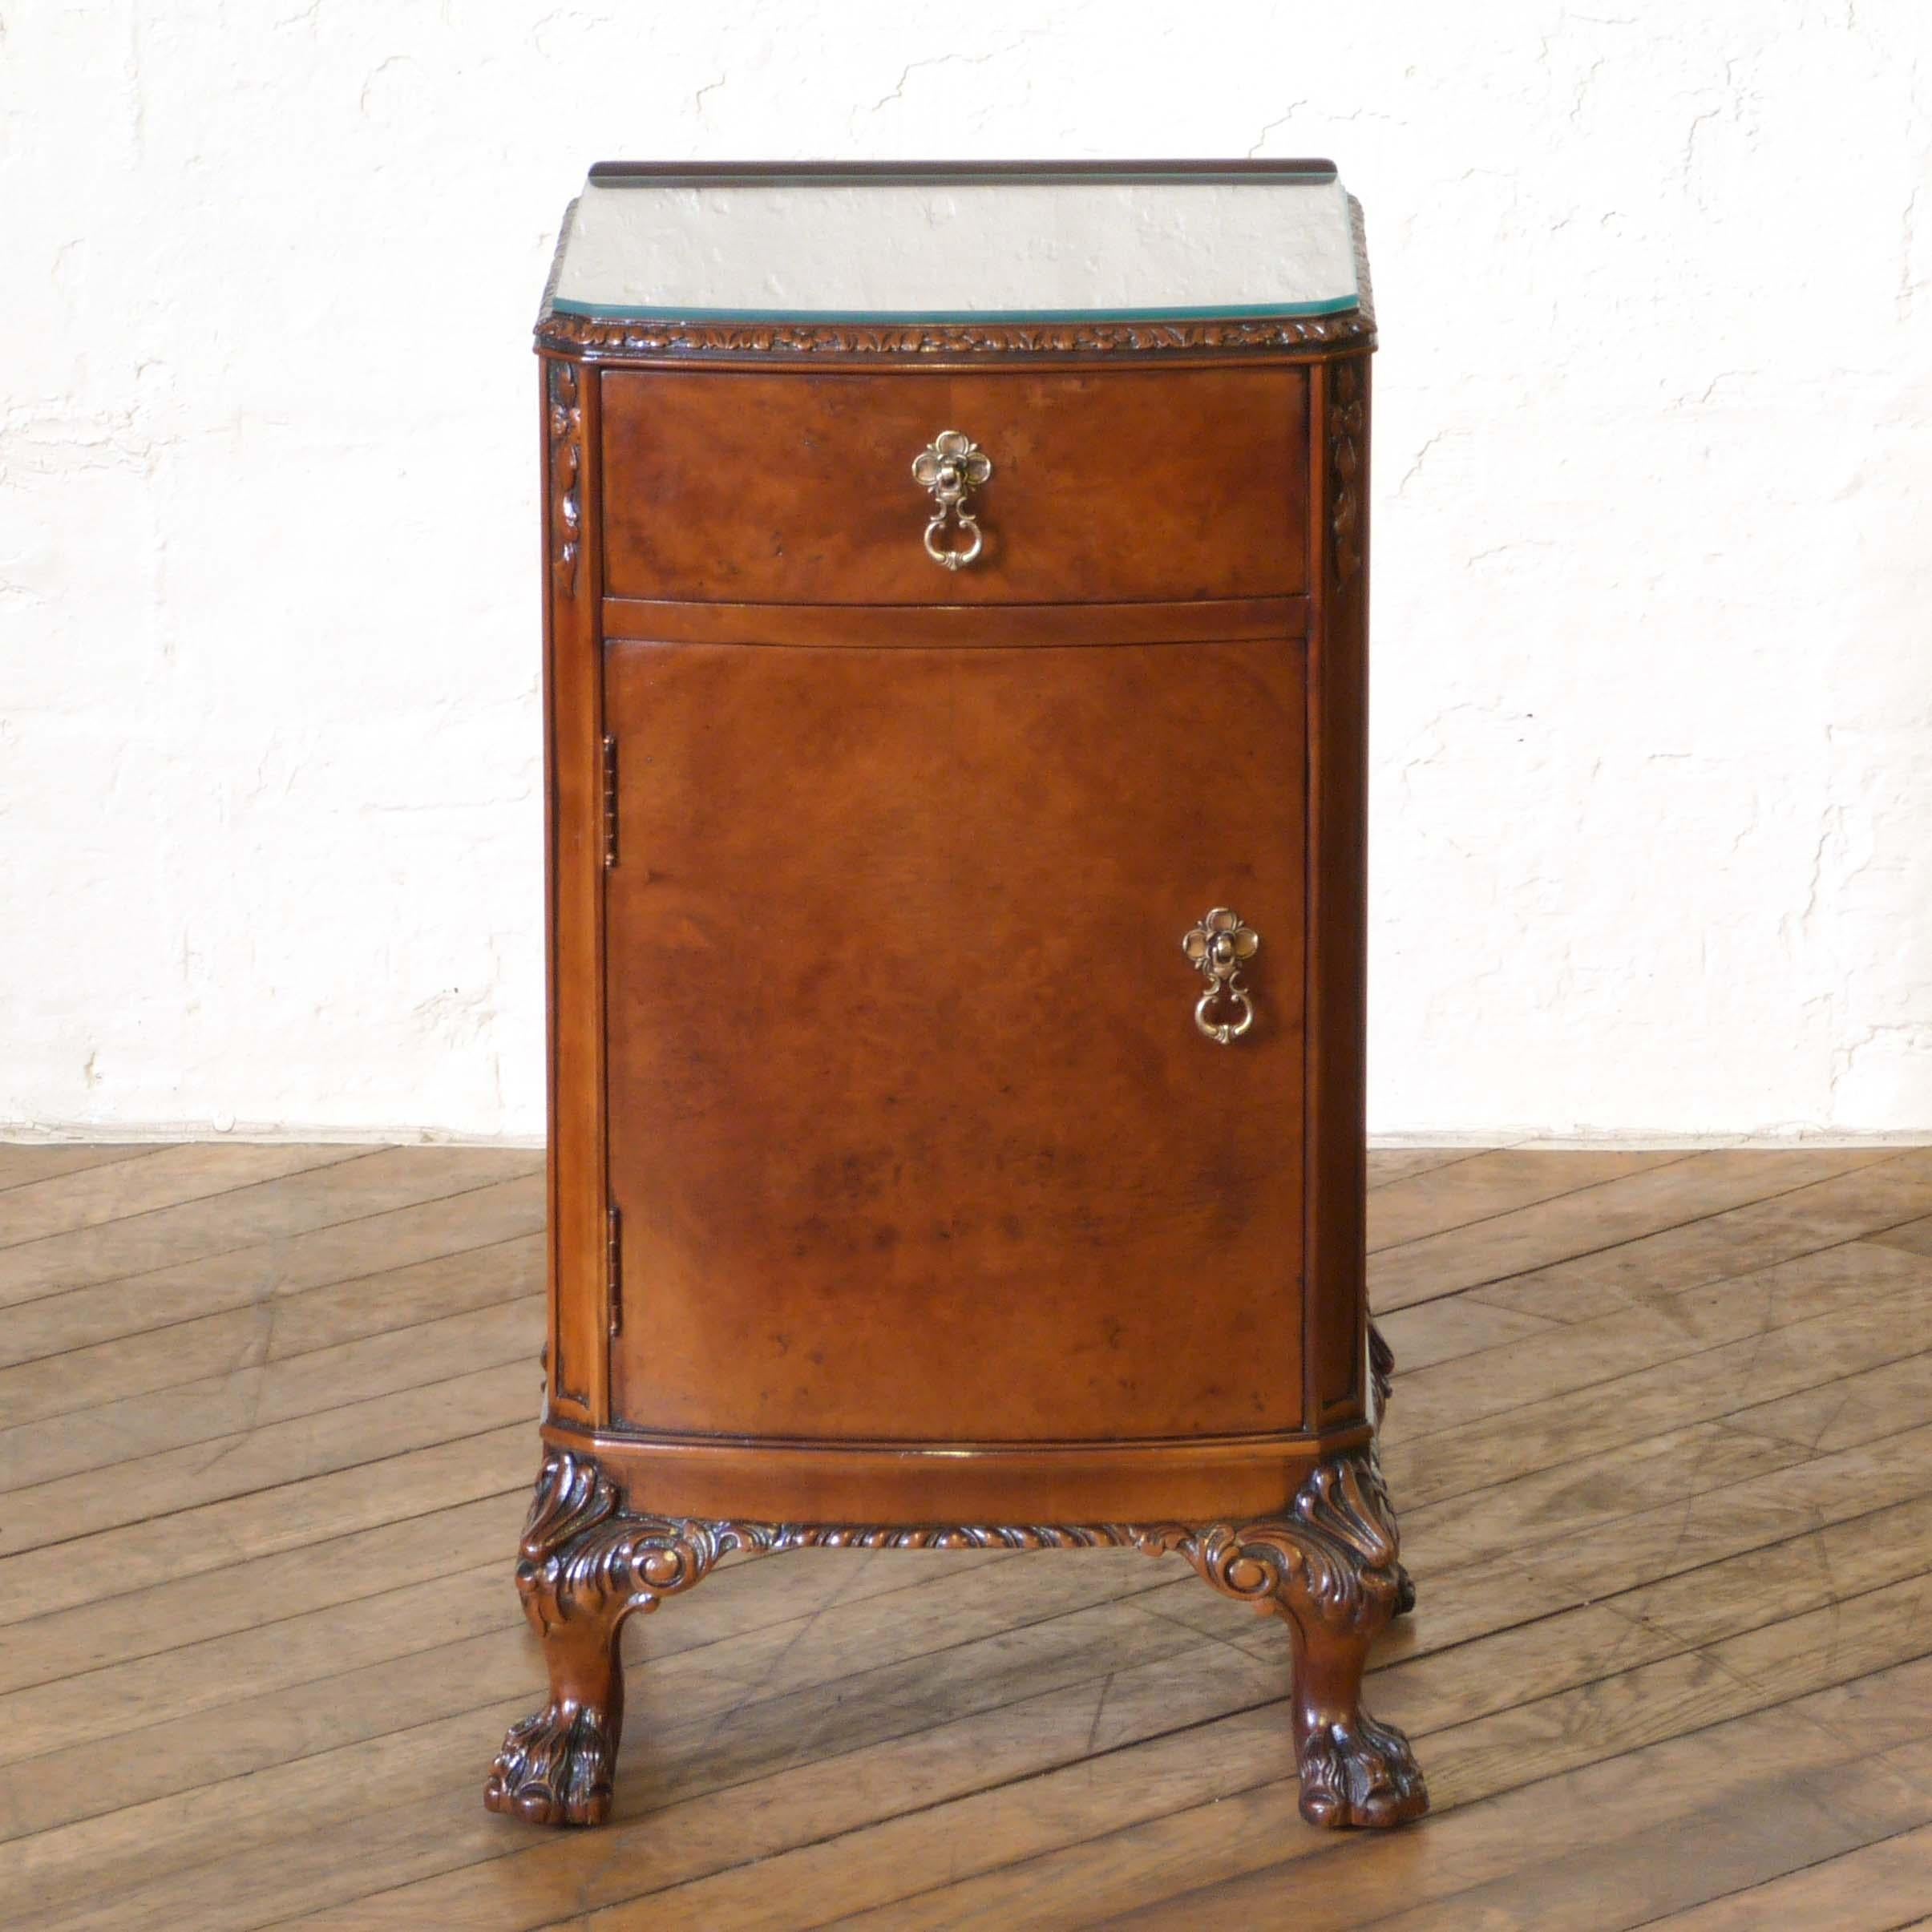 Polished Pair of Queen Anne Style Bedside Cabinets